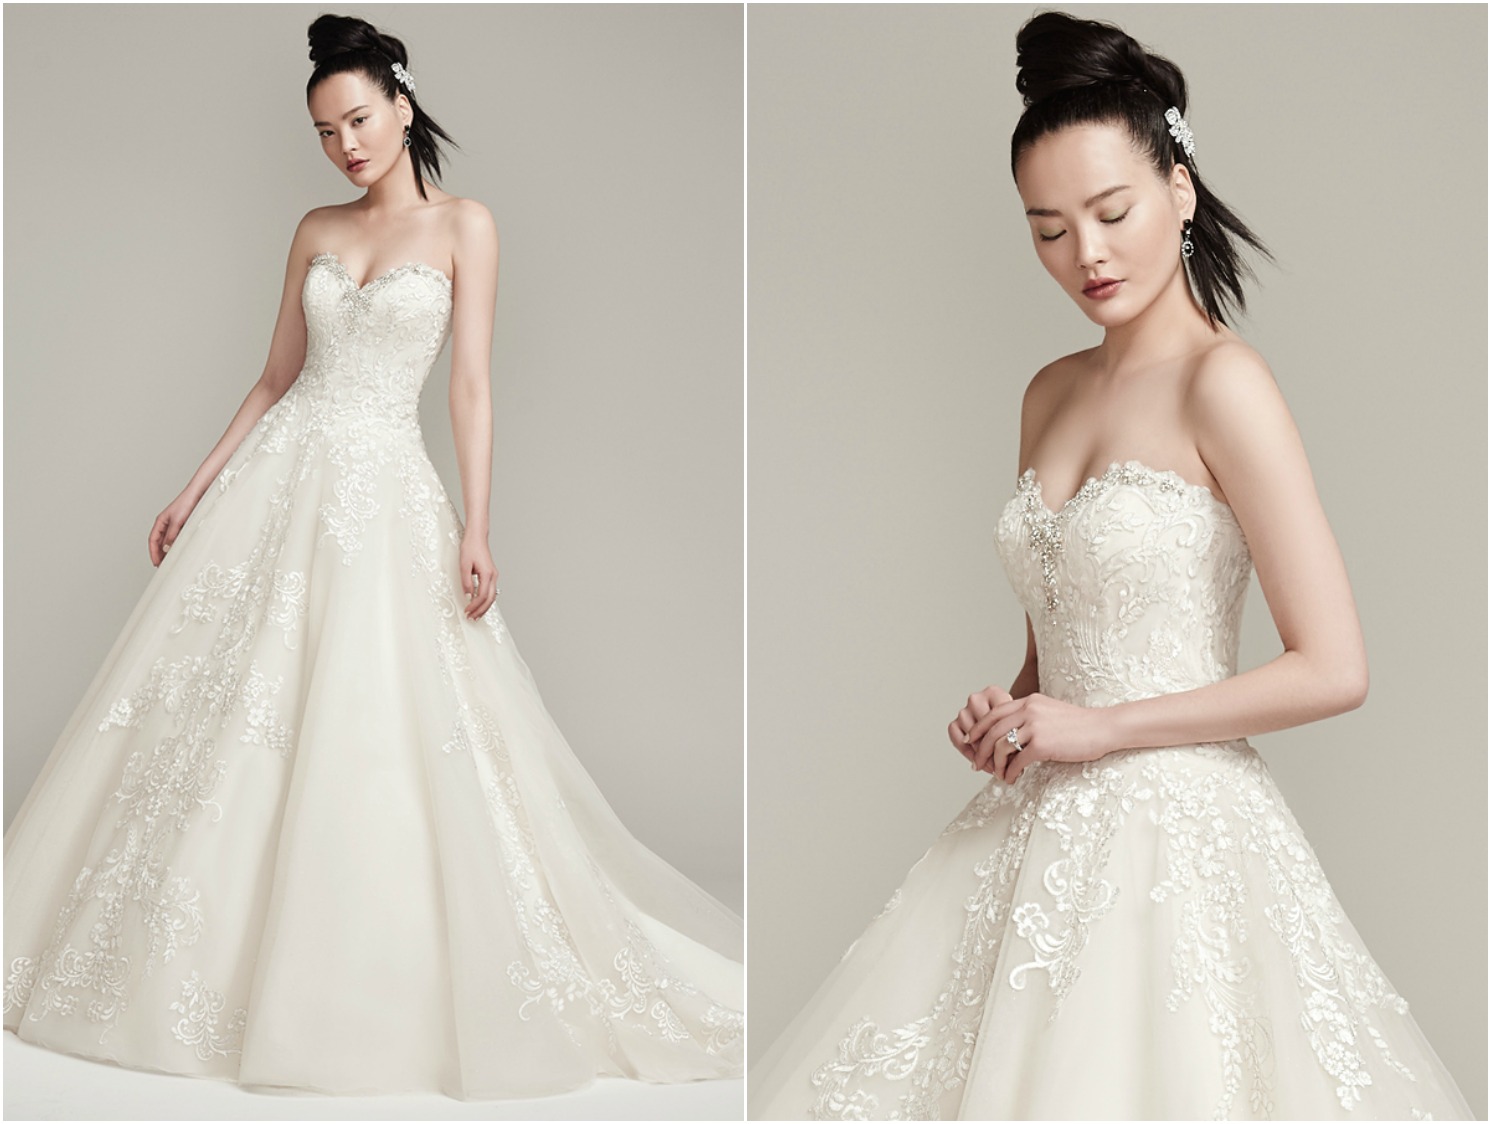 Swarovski crystals trace the sweetheart neckline of this breathtaking lace and tulle ball gown with natural waist. Finished with crystal buttons over zipper and inner corset closure. 

<a href="https://www.maggiesottero.com/sottero-and-midgley/olga/9876" target="_blank">Sottero &amp; Midgley</a>